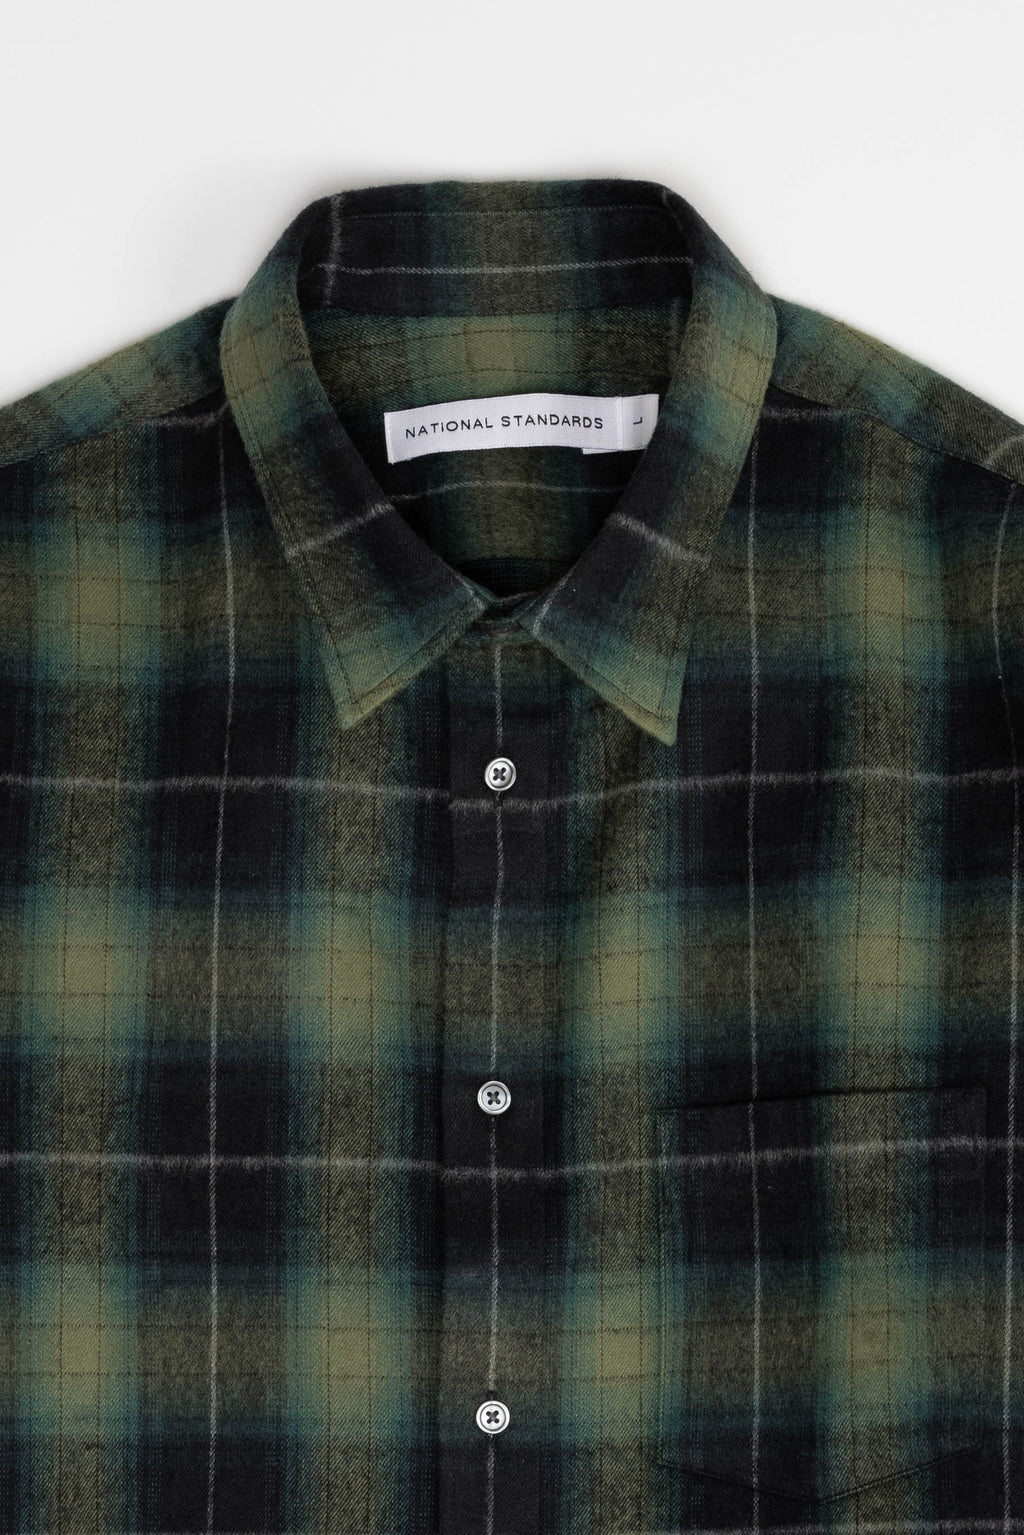 Japanese Shaggy Plaid in Green and Navy 05